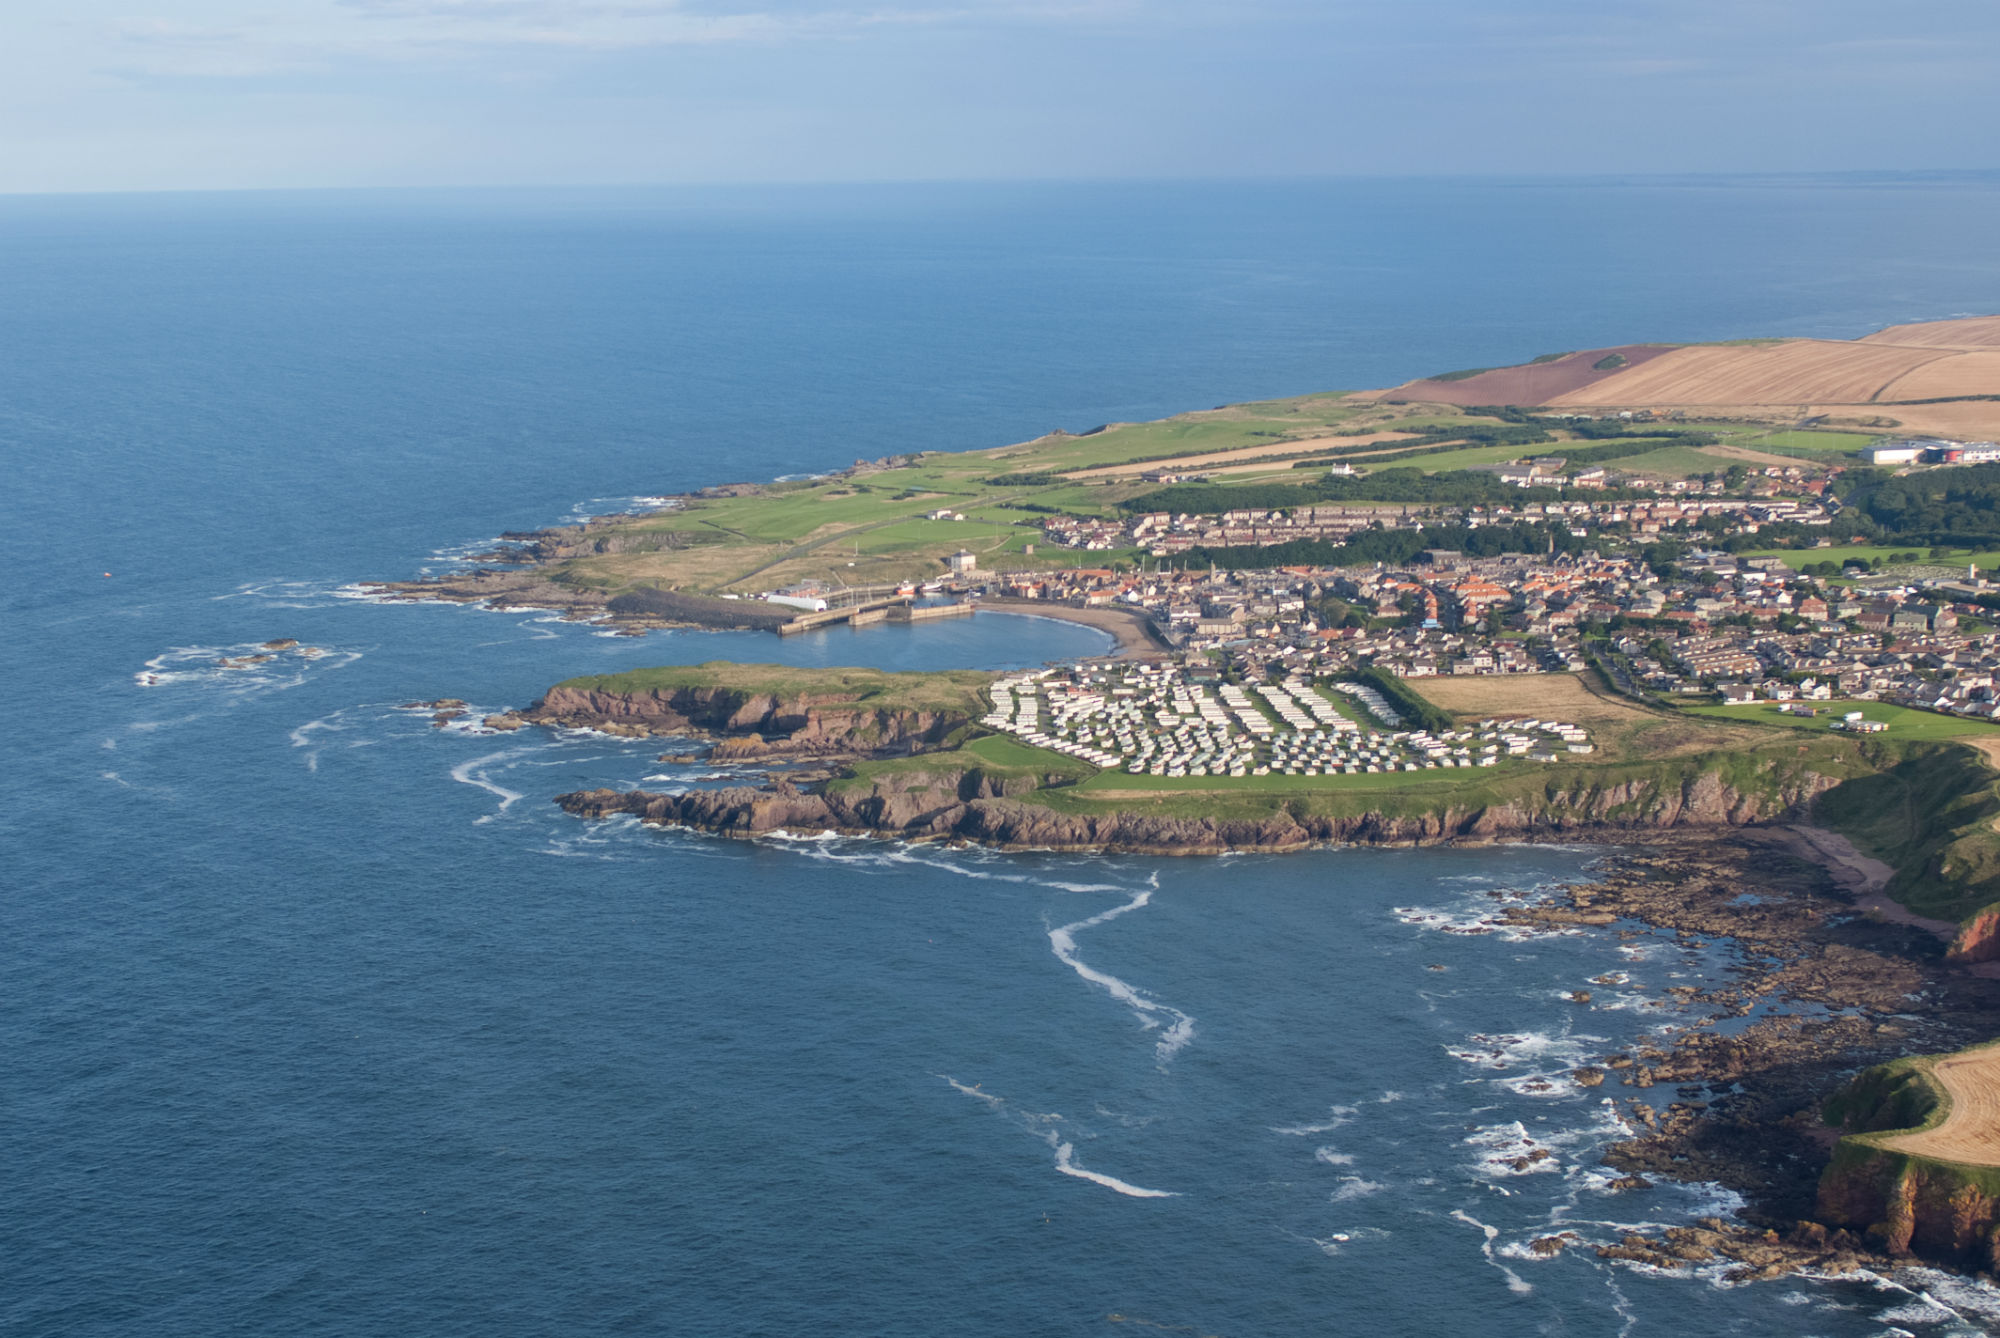 Eyemouth Fort aerial view showing the fort and town